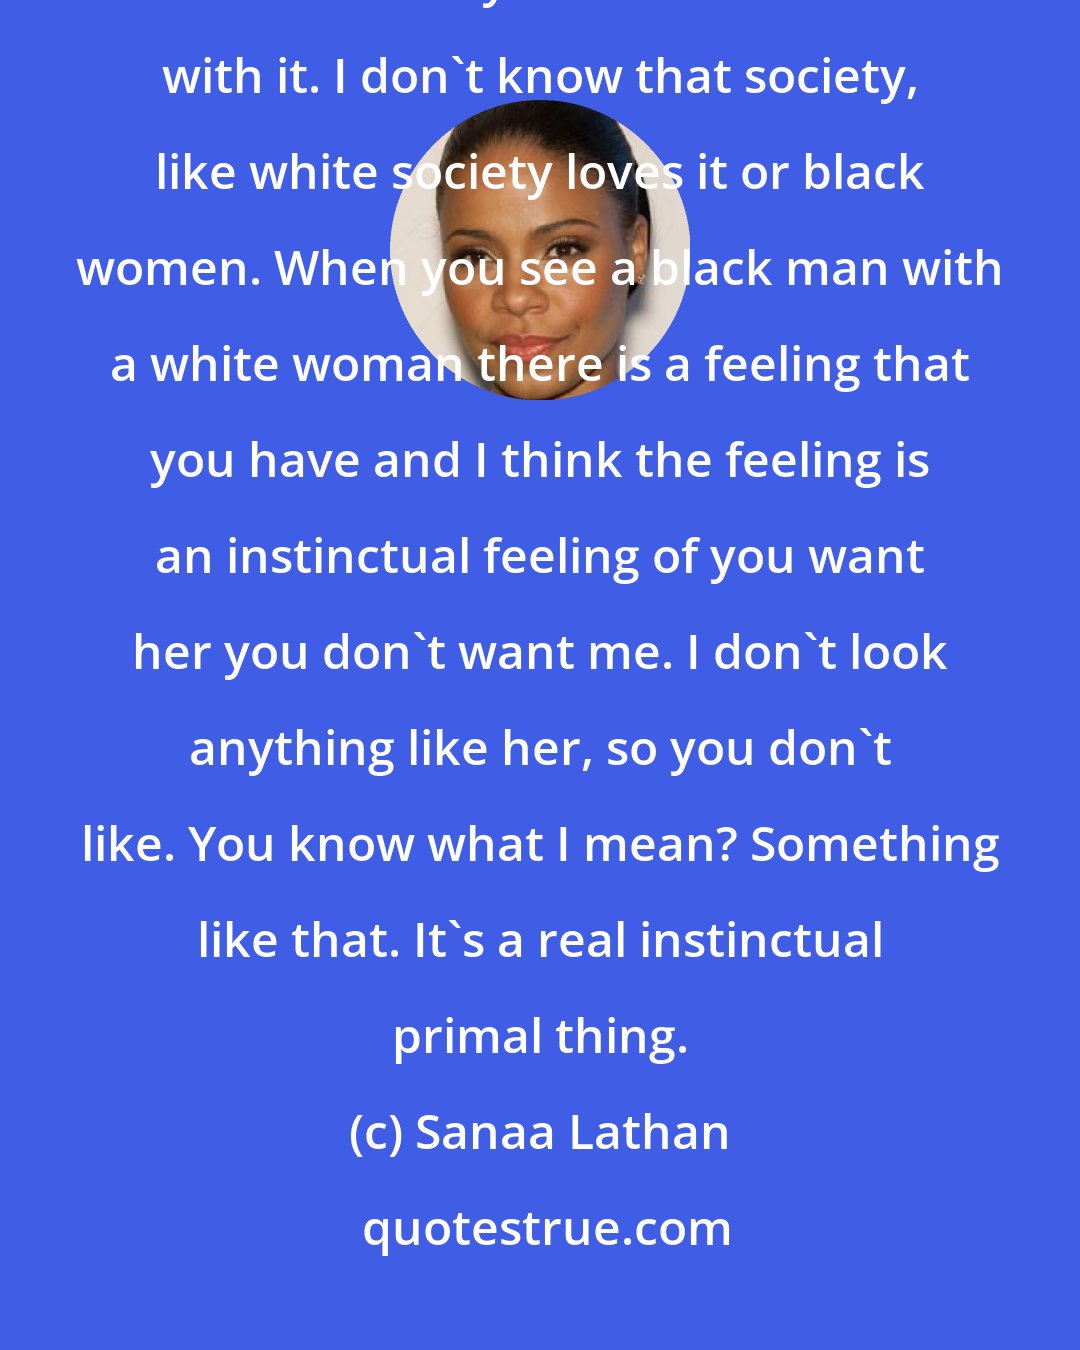 Sanaa Lathan: I don't know if it's more acceptable or if black men are more comfortable. Black men certainly are more comfortable with it. I don't know that society, like white society loves it or black women. When you see a black man with a white woman there is a feeling that you have and I think the feeling is an instinctual feeling of you want her you don't want me. I don't look anything like her, so you don't like. You know what I mean? Something like that. It's a real instinctual primal thing.